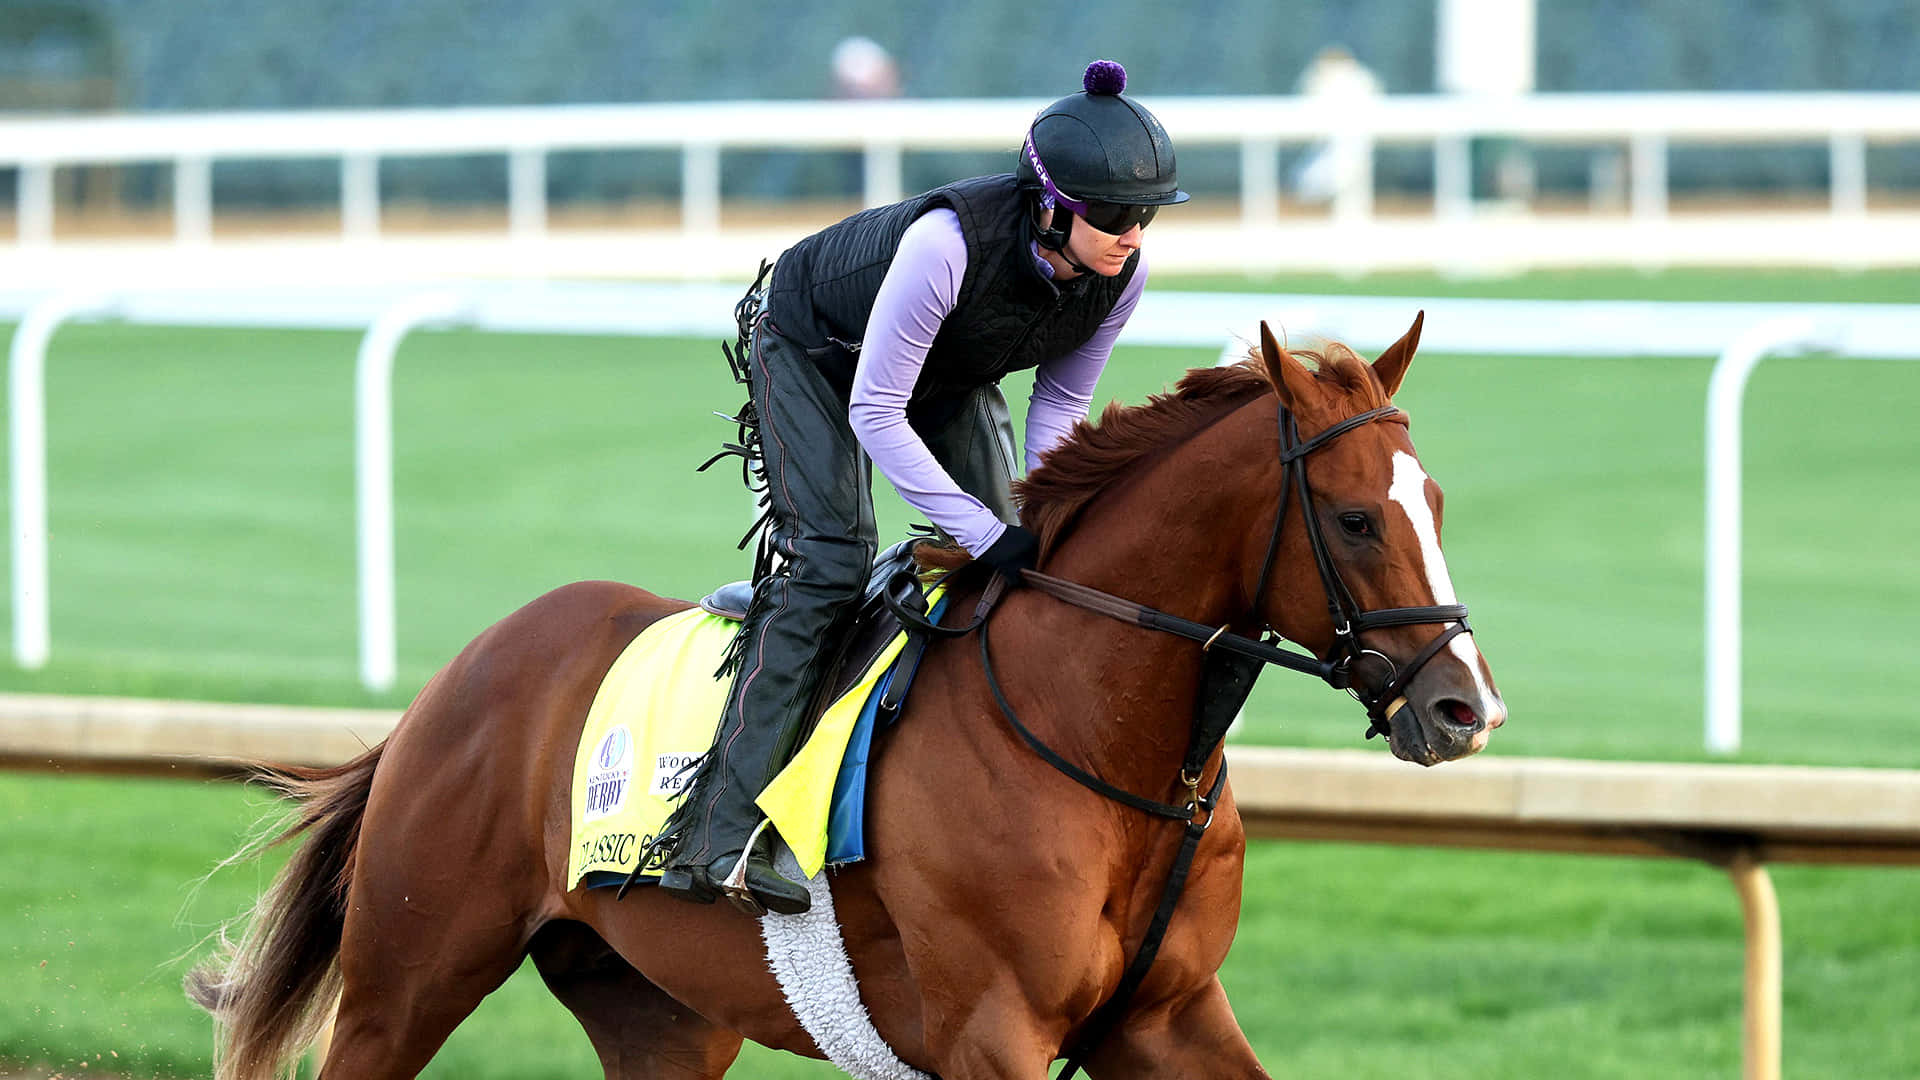 "Rival horses come together as prized contenders for the Kentucky Derby 2022, the most anticipated horse race of the year."